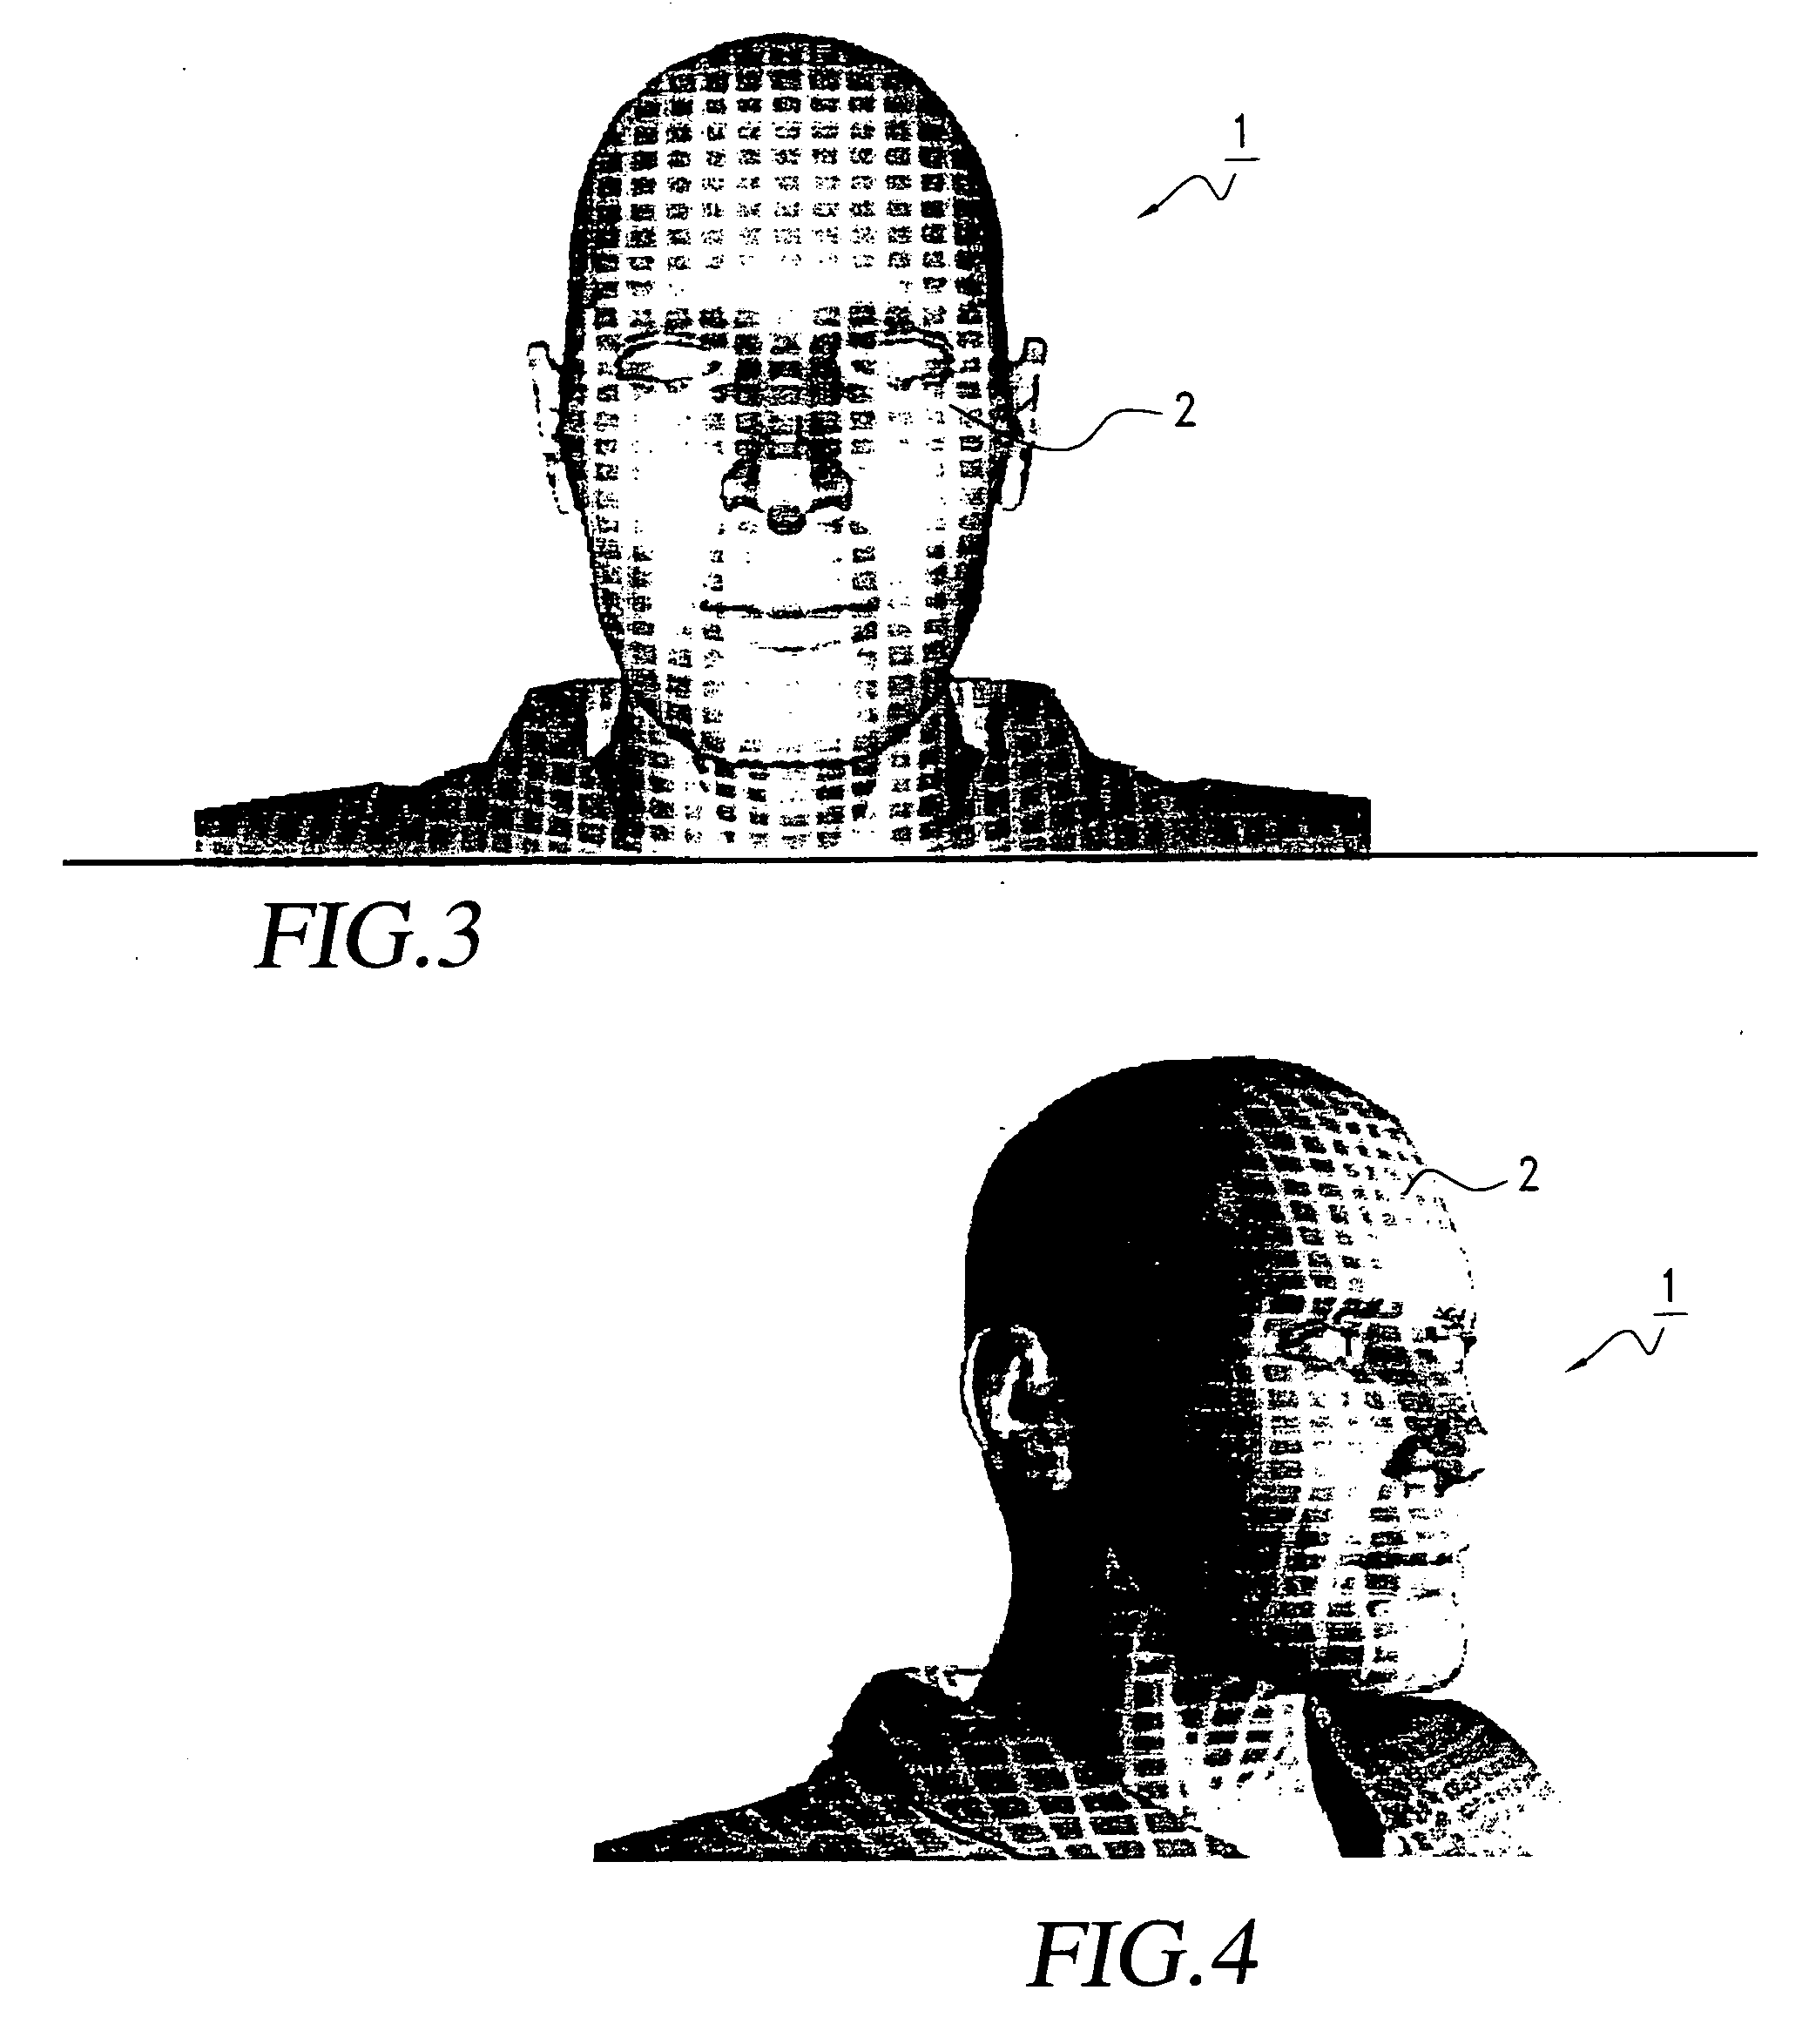 System and method for inputting contours of a three-dimensional subject to a computer